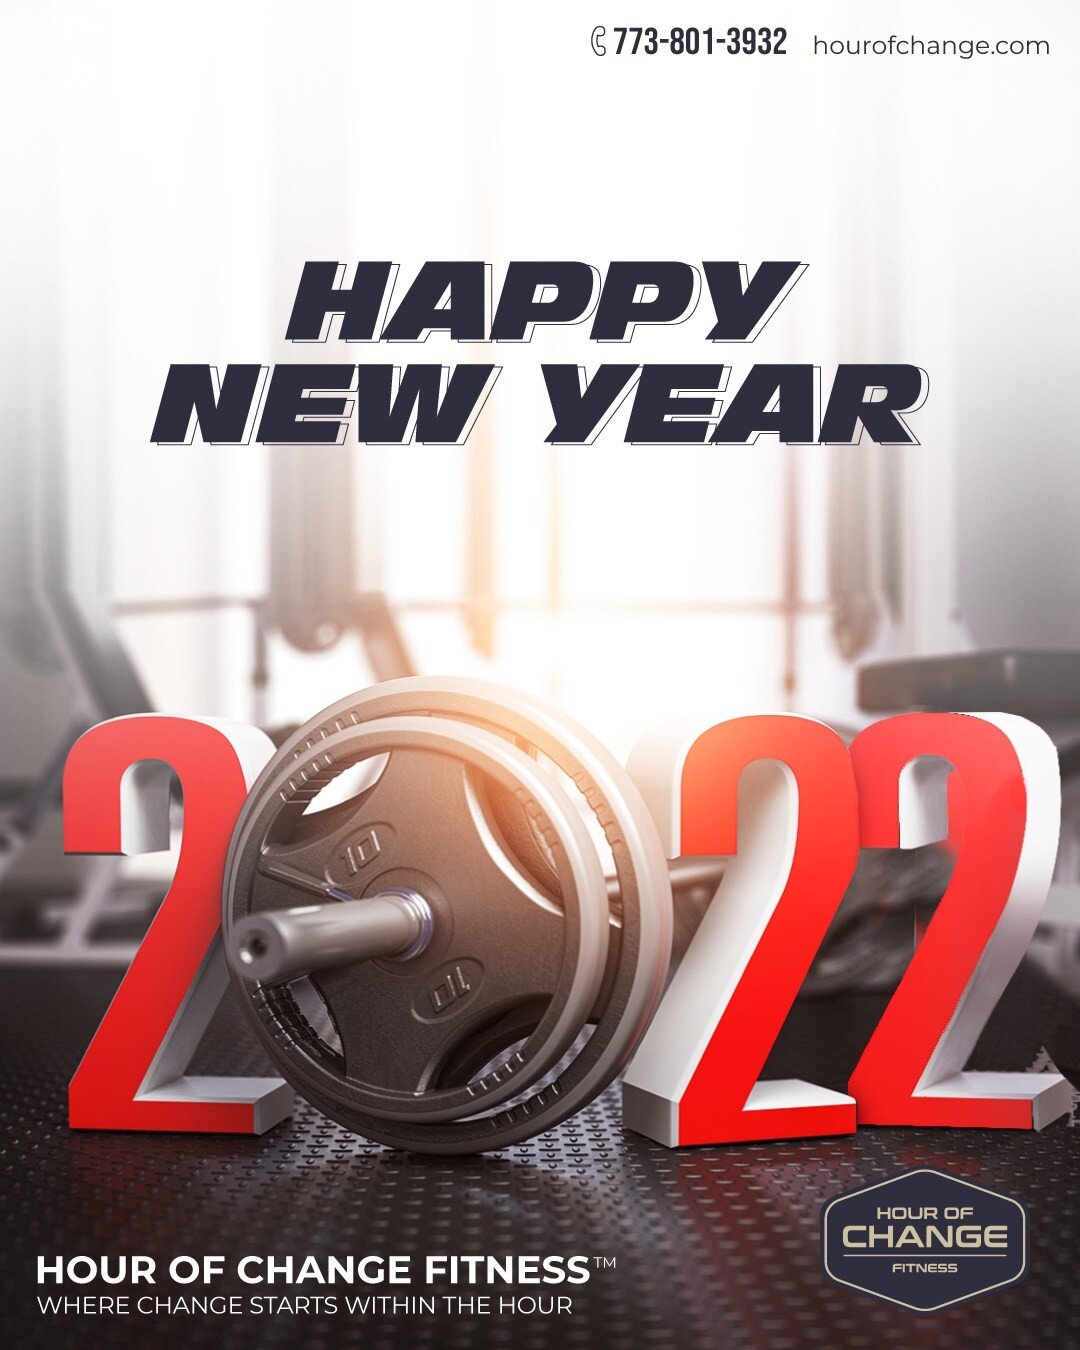 A NEW year, a NEW start and a way to GO.

We at Hour of Change Fitness wish you all a Happy
New Year!